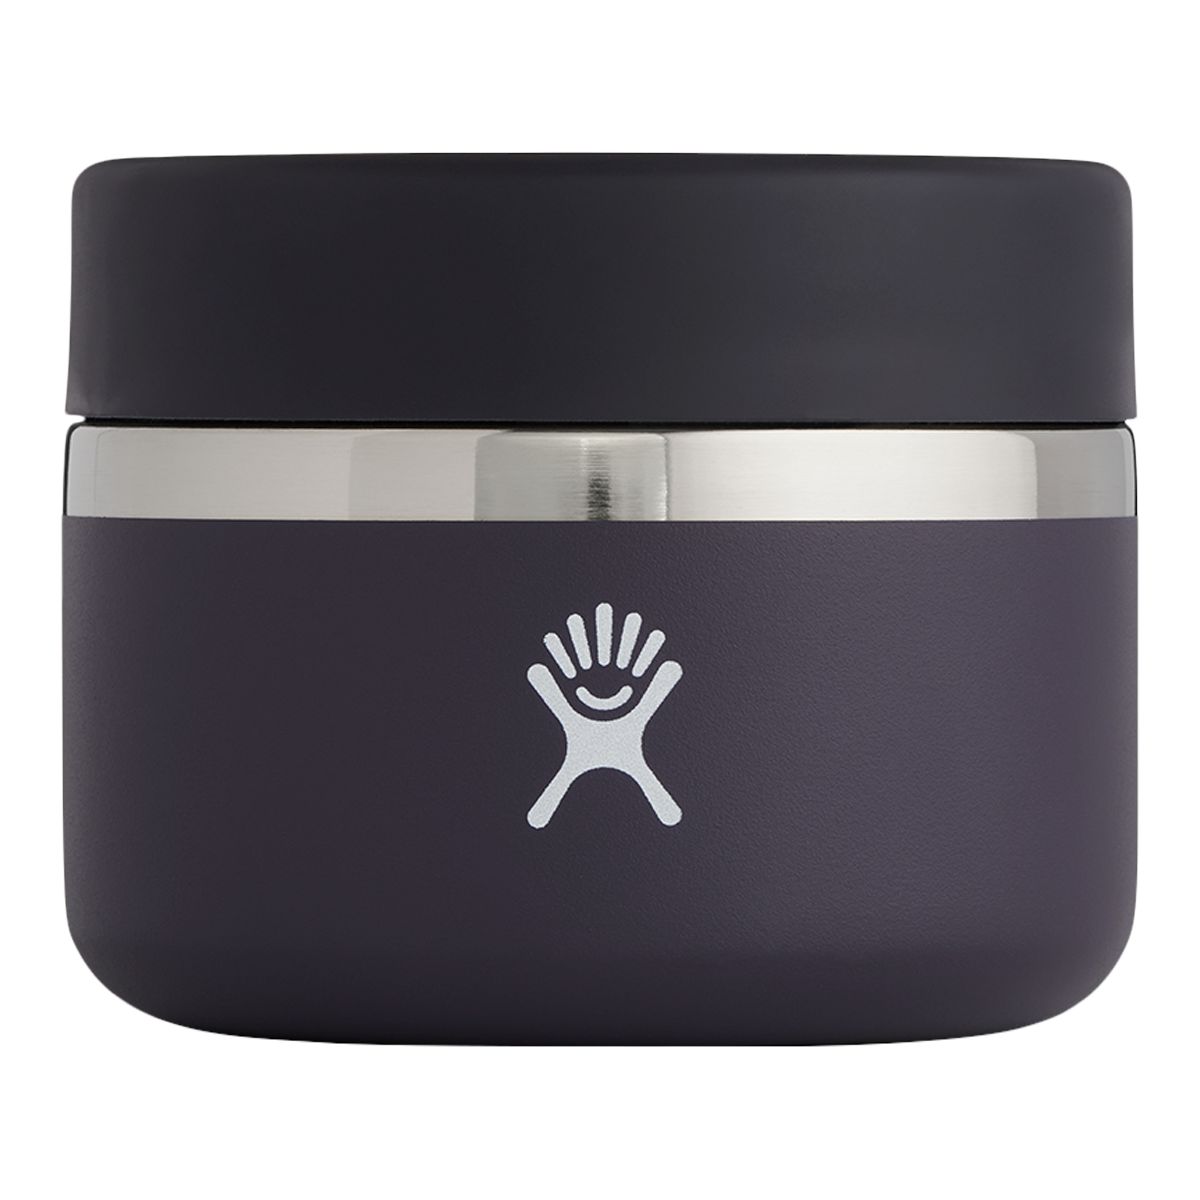 Image of Hydro Flask Insulated Food Jar 12 oz